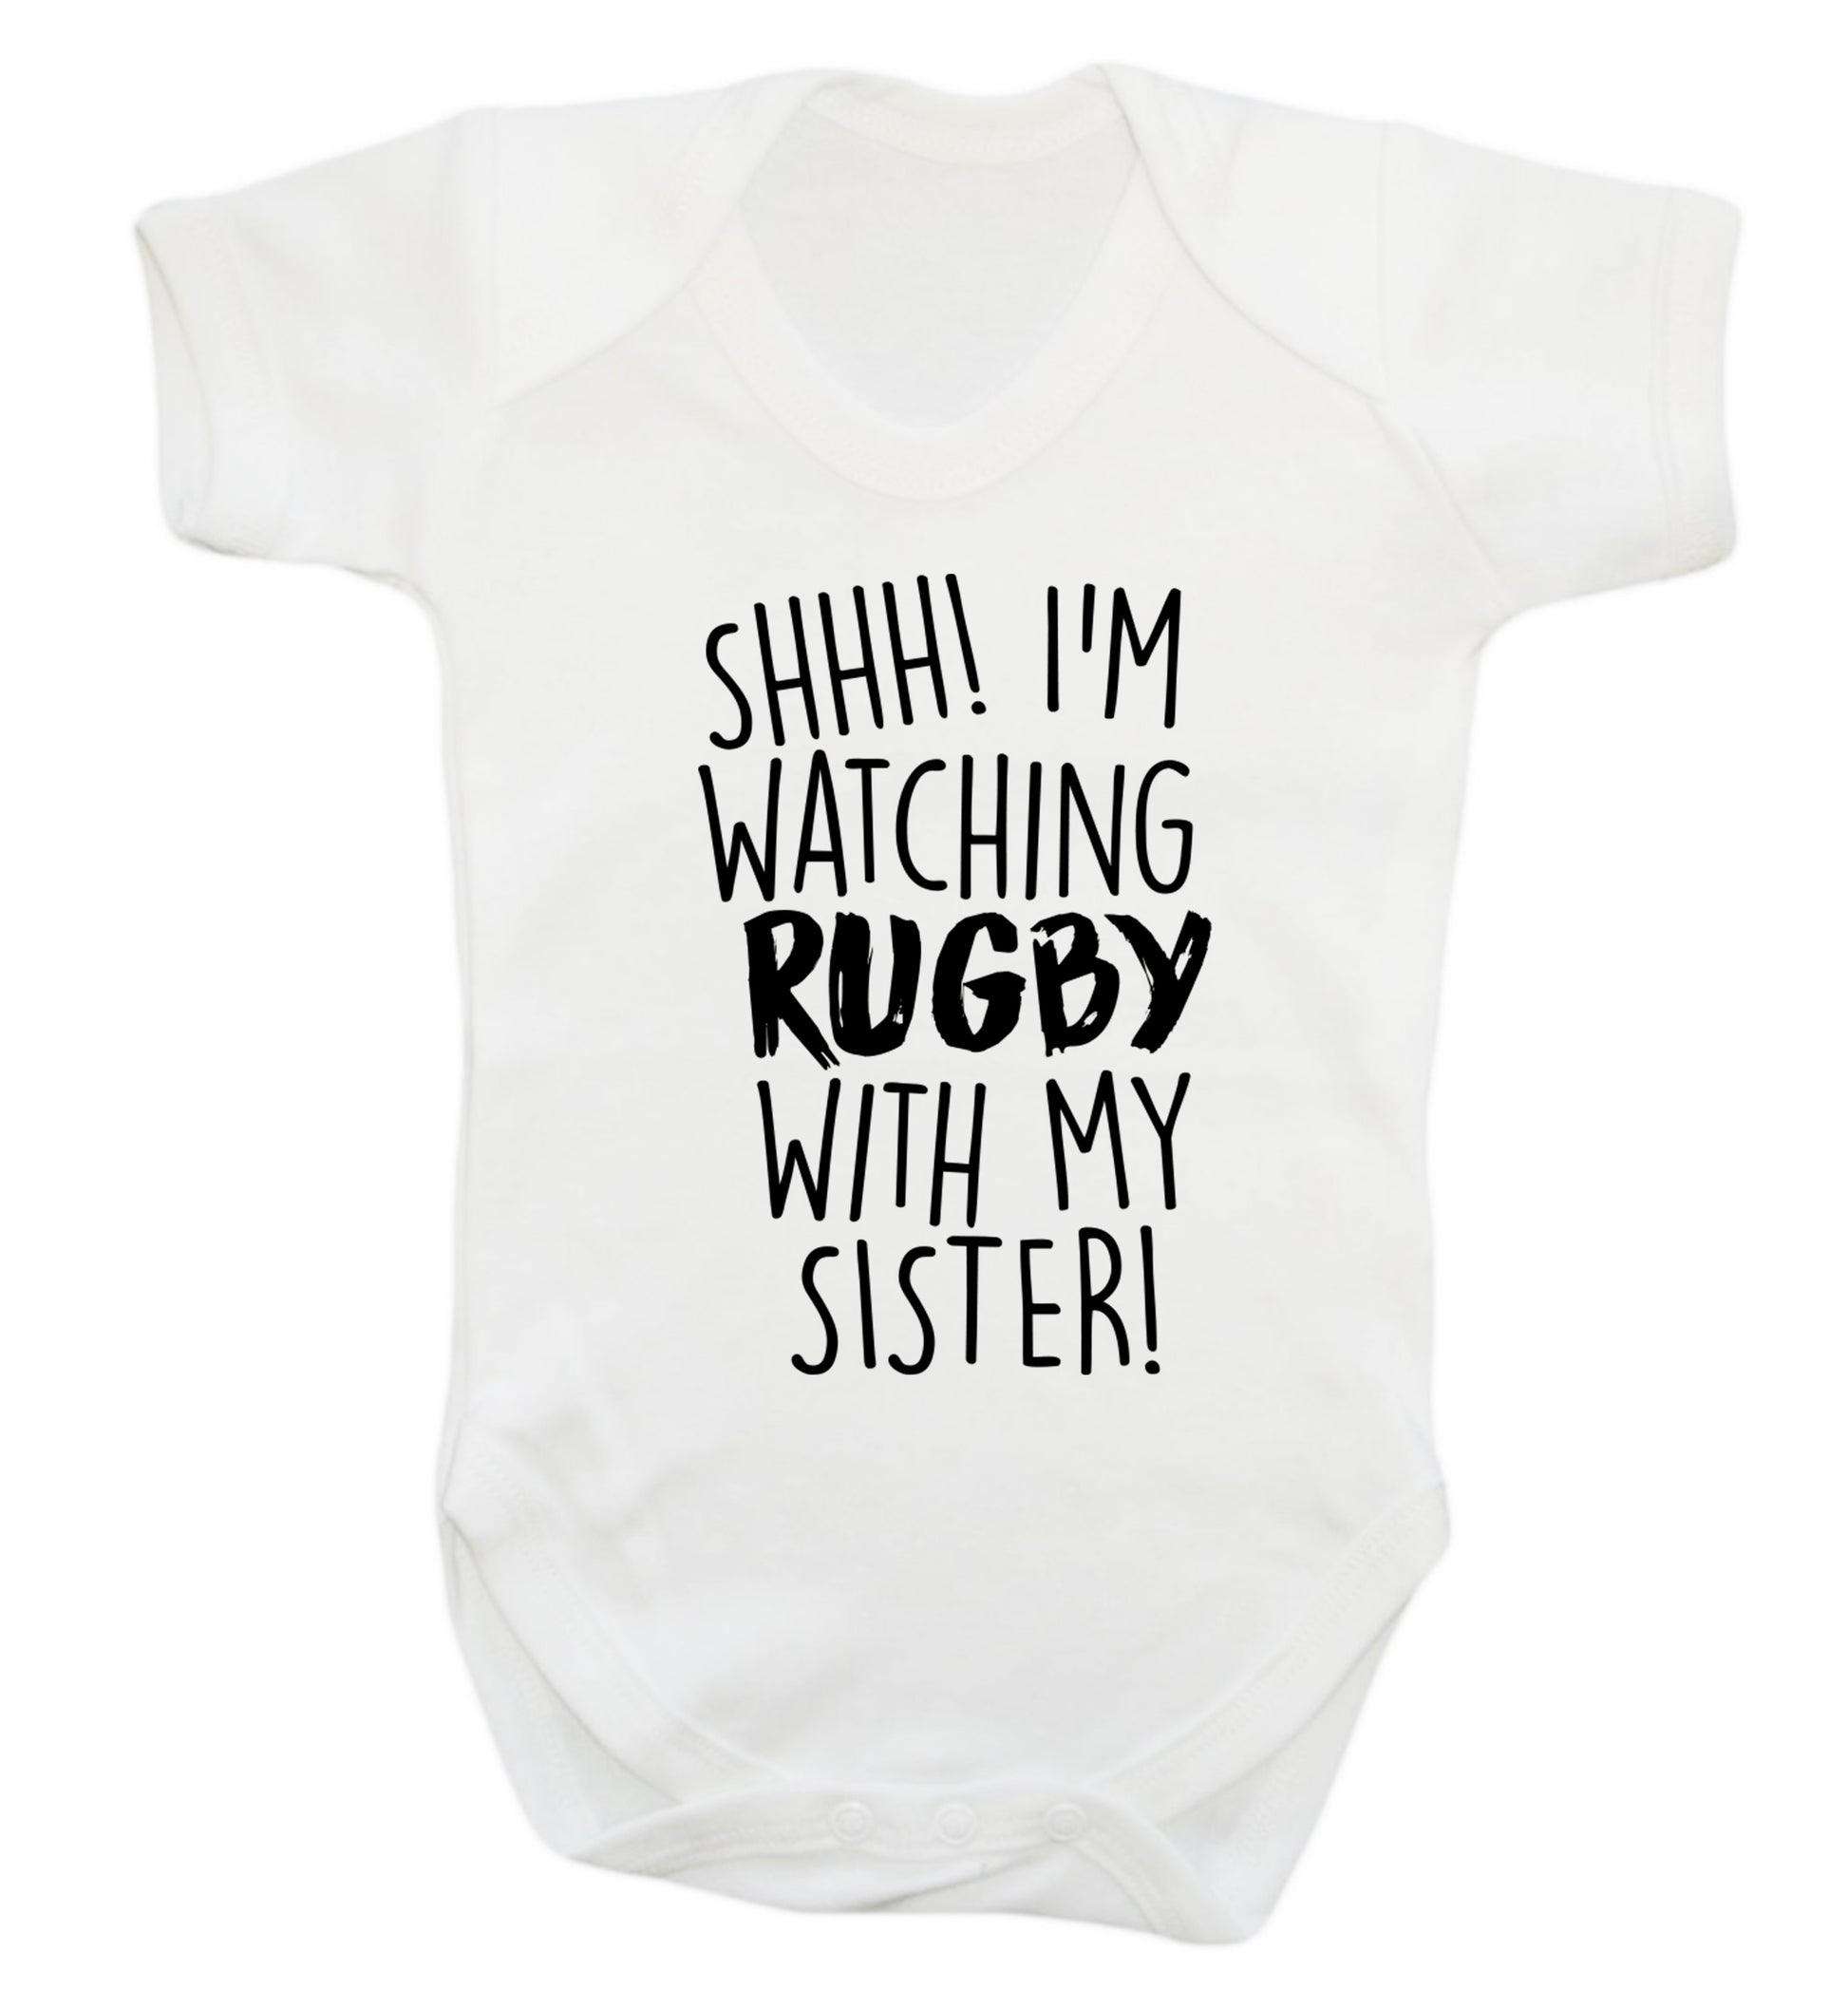 Shh... I'm watching rugby with my sister Baby Vest white 18-24 months